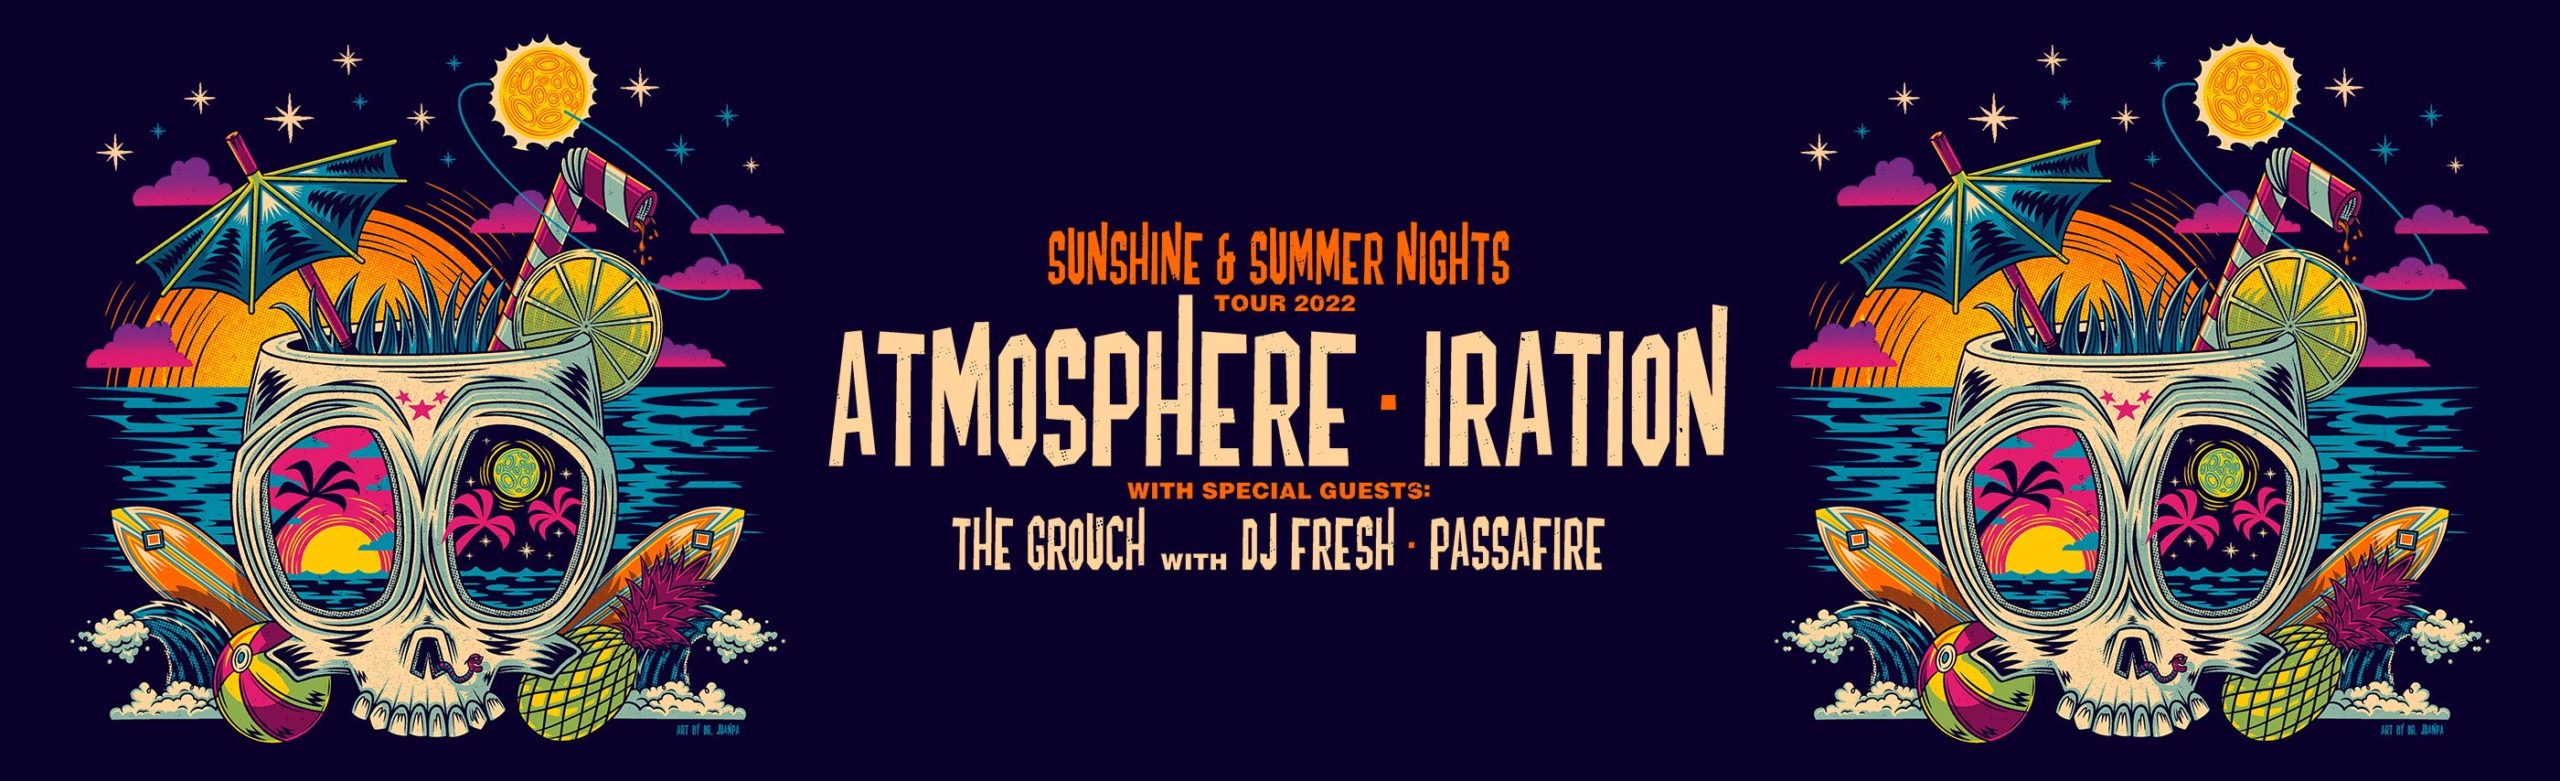 Atmosphere and Iration